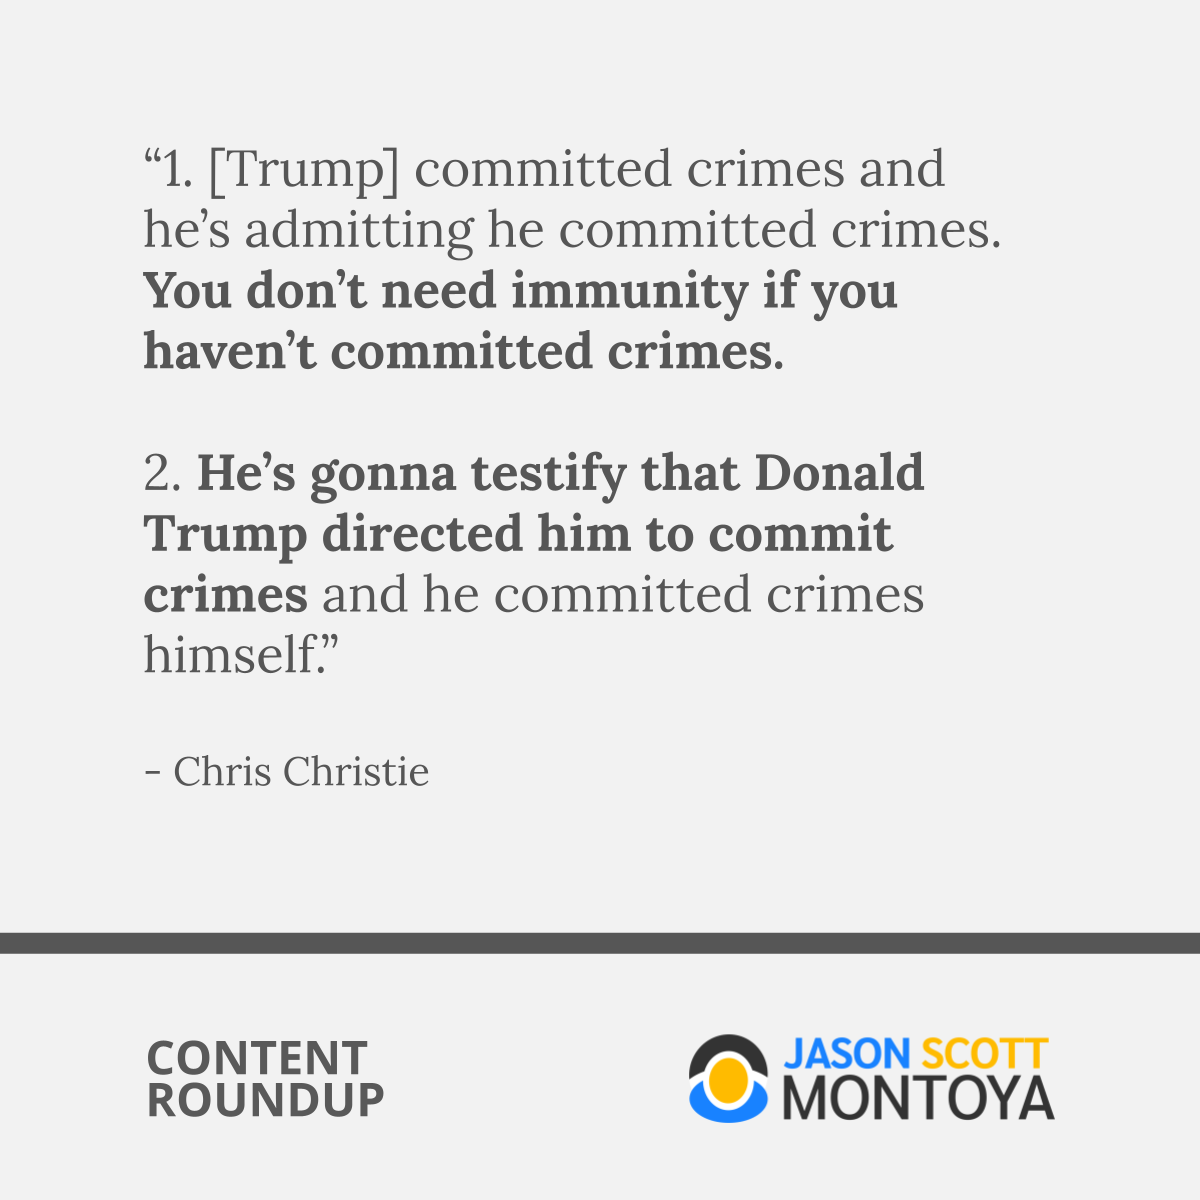 “1. [Trump] committed crimes and he’s admitting he committed crimes. You don’t need immunity if you haven’t committed crimes.   2. He’s gonna testify that Donald Trump directed him to commit crimes and he committed crimes himself.”  - Chris Christie